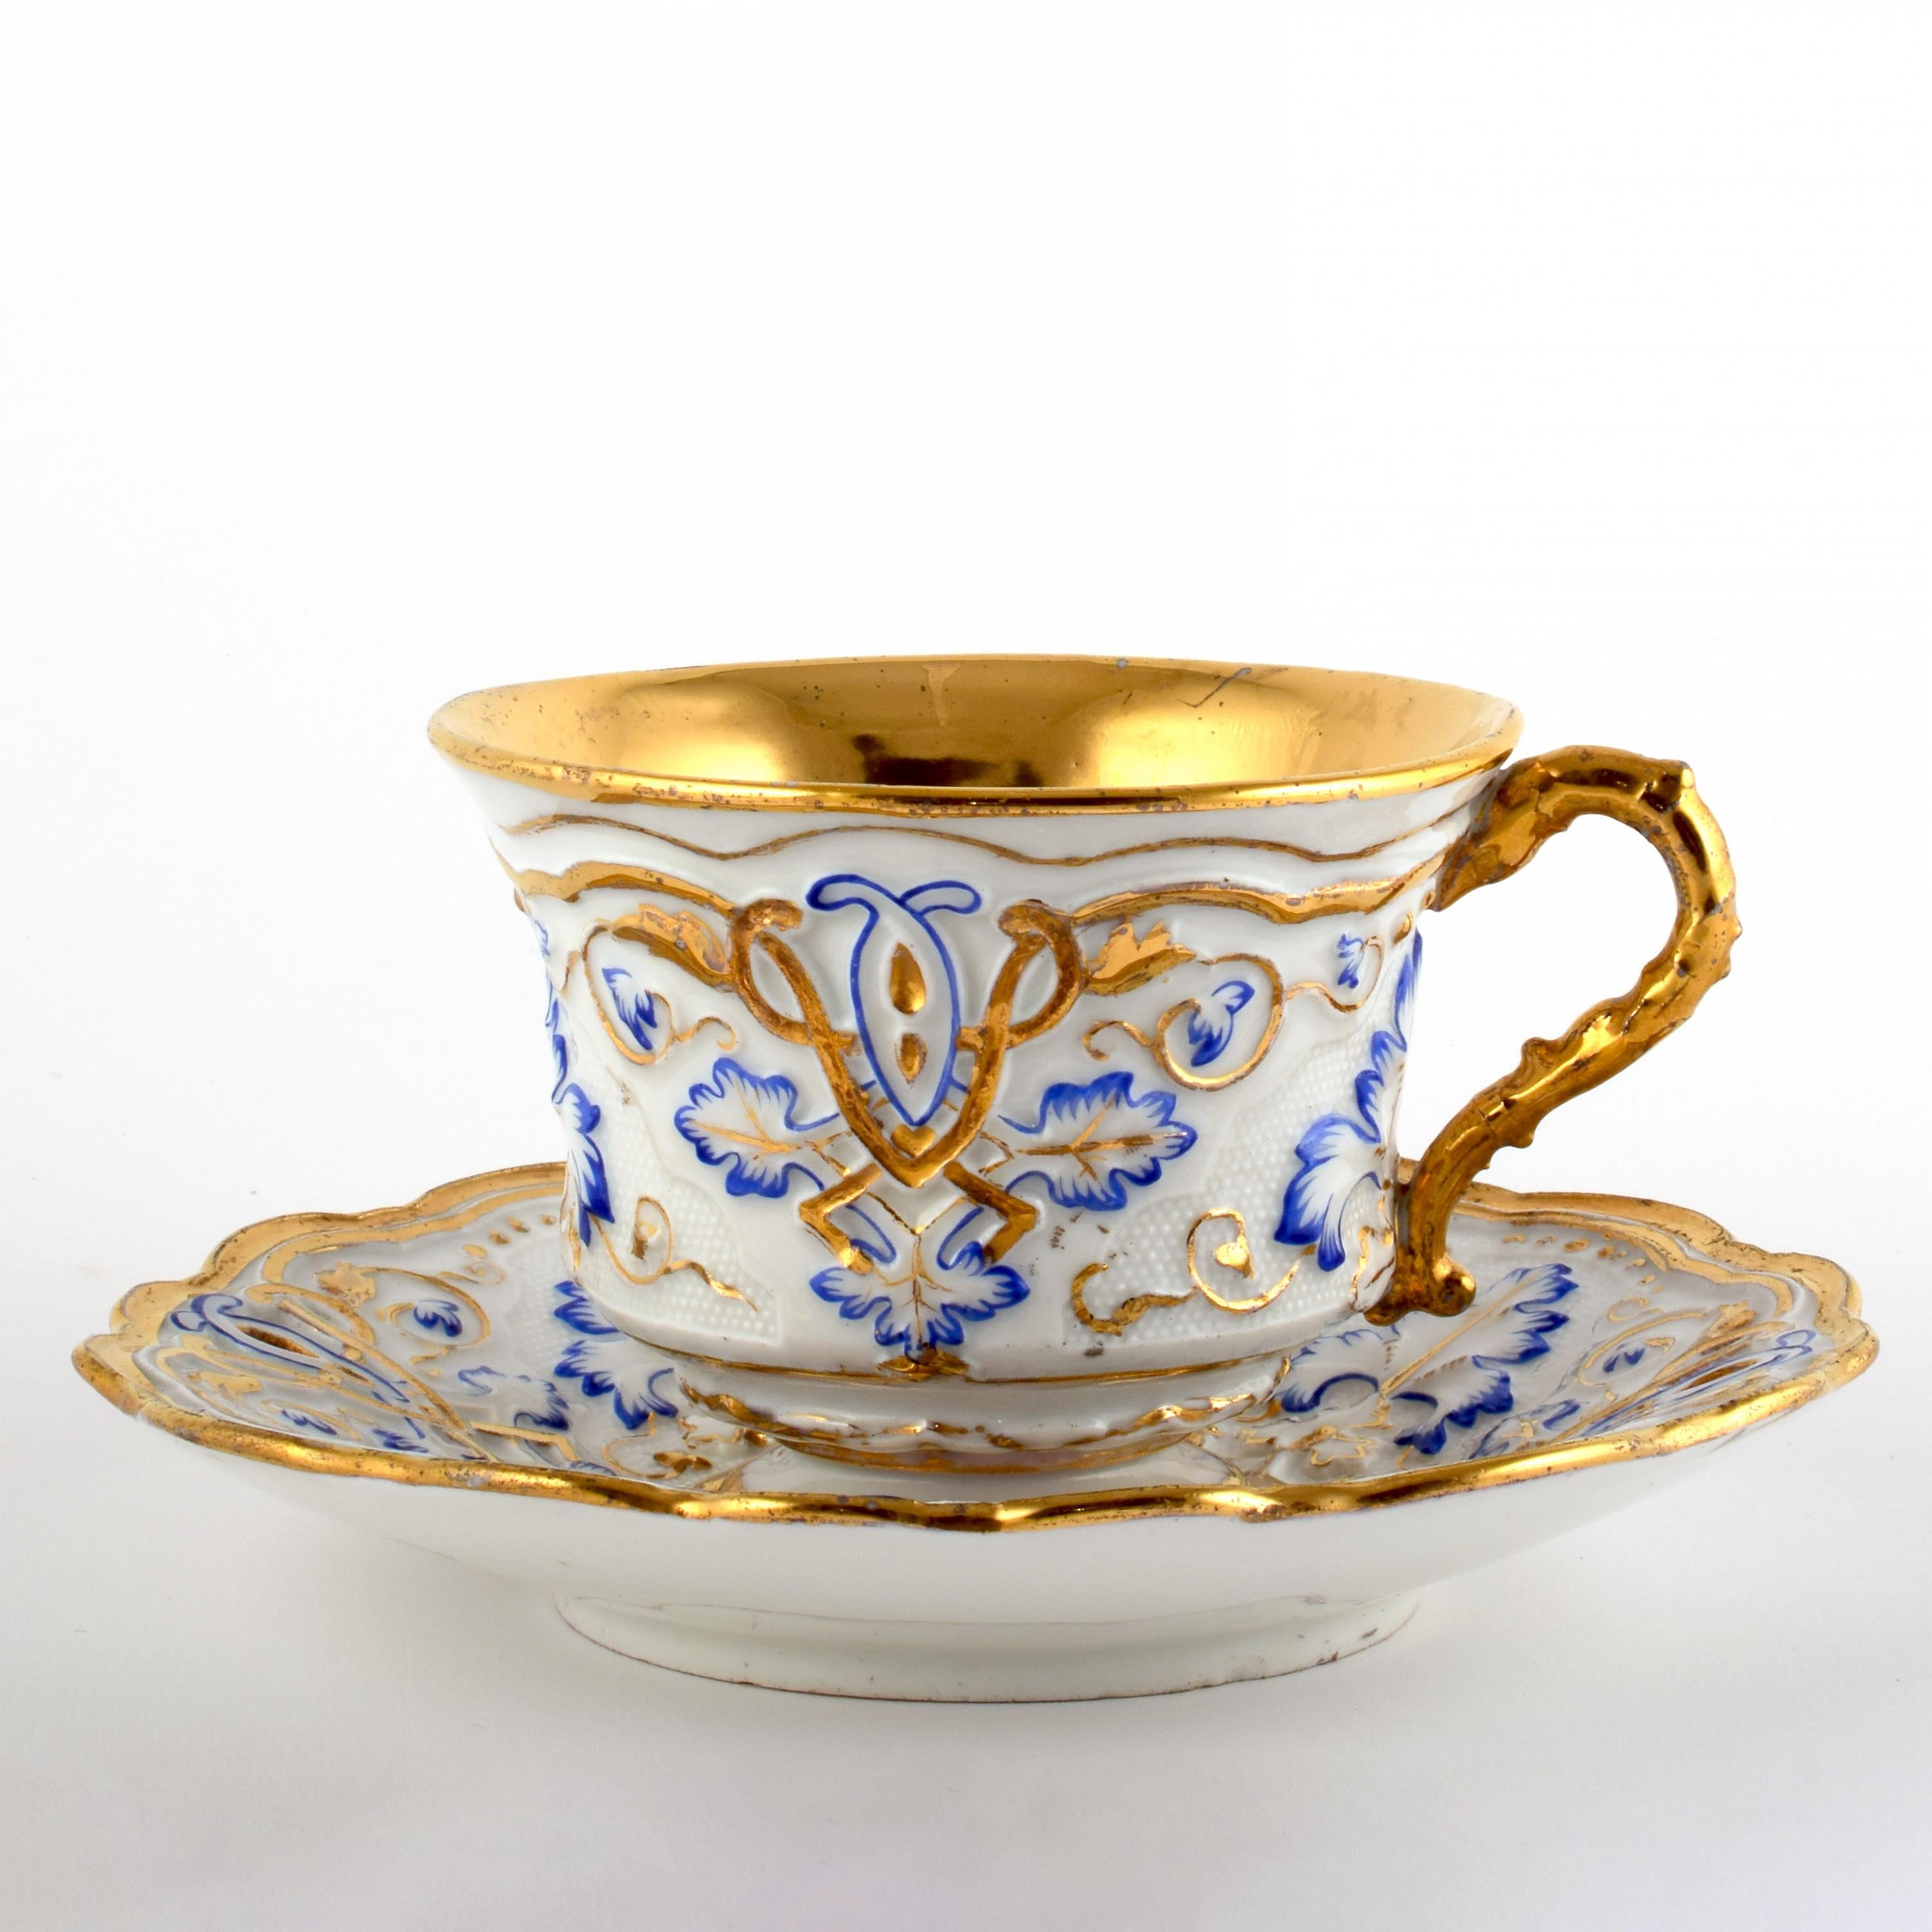 19th century Meissen porcelain cup and saucer.
White porcelain cup and saucer beautifully decorated in blue and gold gilt. Hand painted.
Small chip on the foot rim of the saucer. Not seen unless turned upside down.

Measurement (cm)
Cup: Height